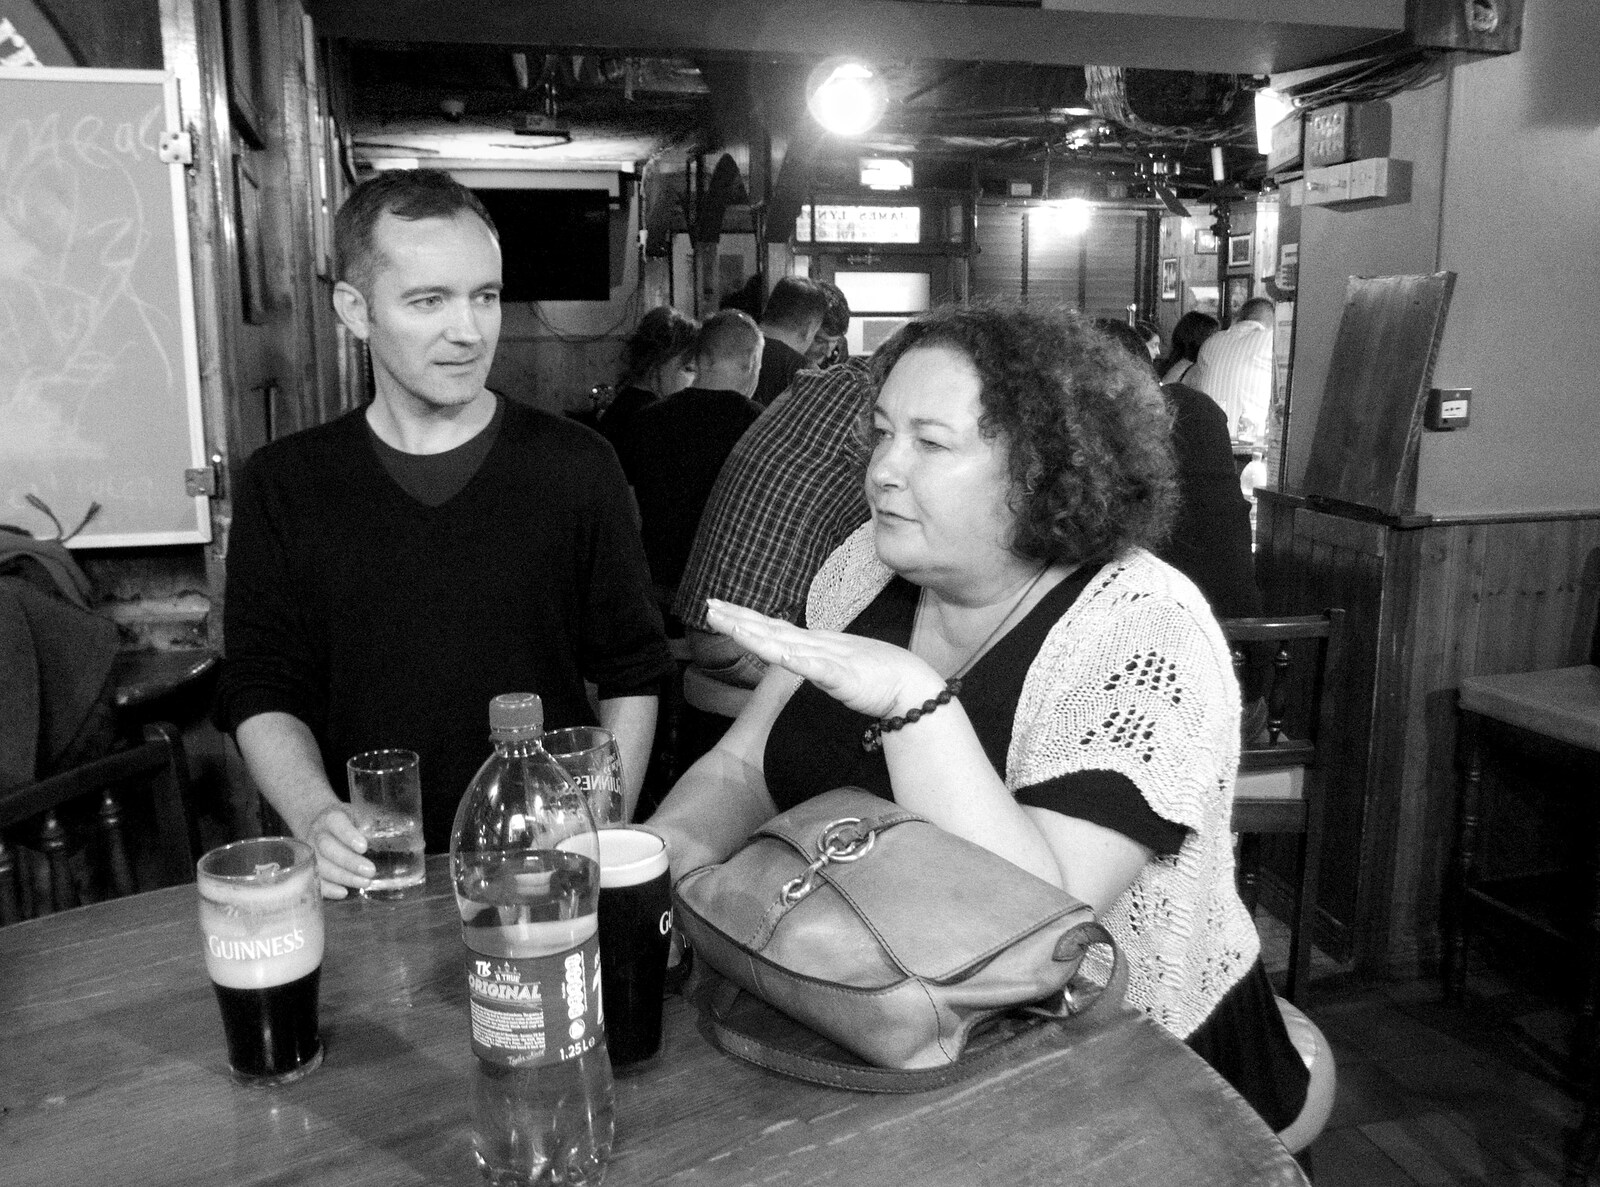 James and Louise in The Market Bar from Glencar Waterfall and Parke's Castle, Kilmore, Leitrim, Ireland - 18th August 2019